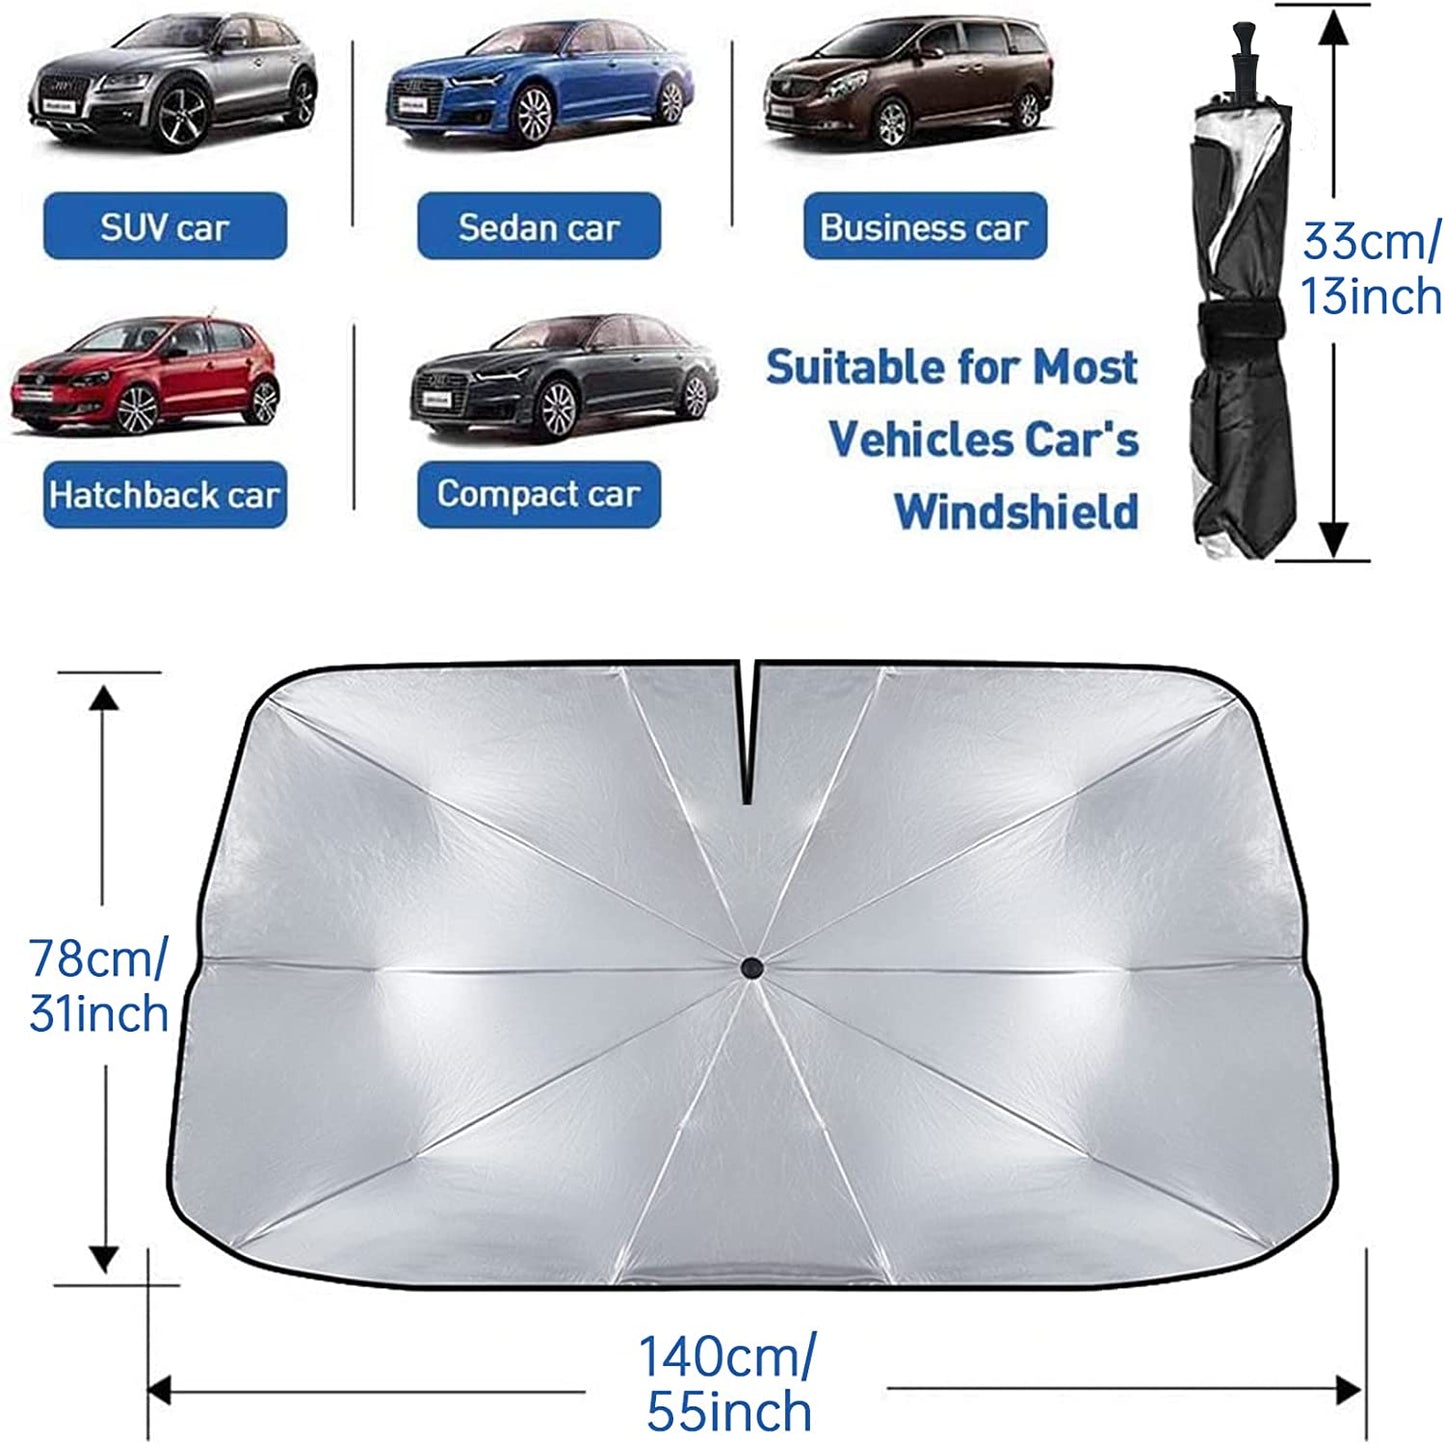 Car Windshield Sun Shade Umbrella, Upgraded Car Windshield Cover Sunshade 360°Rotation Bendable Shaft, UV Block for Car Front Window, Foldable sunshades Suitable for Most Cars and Trucks